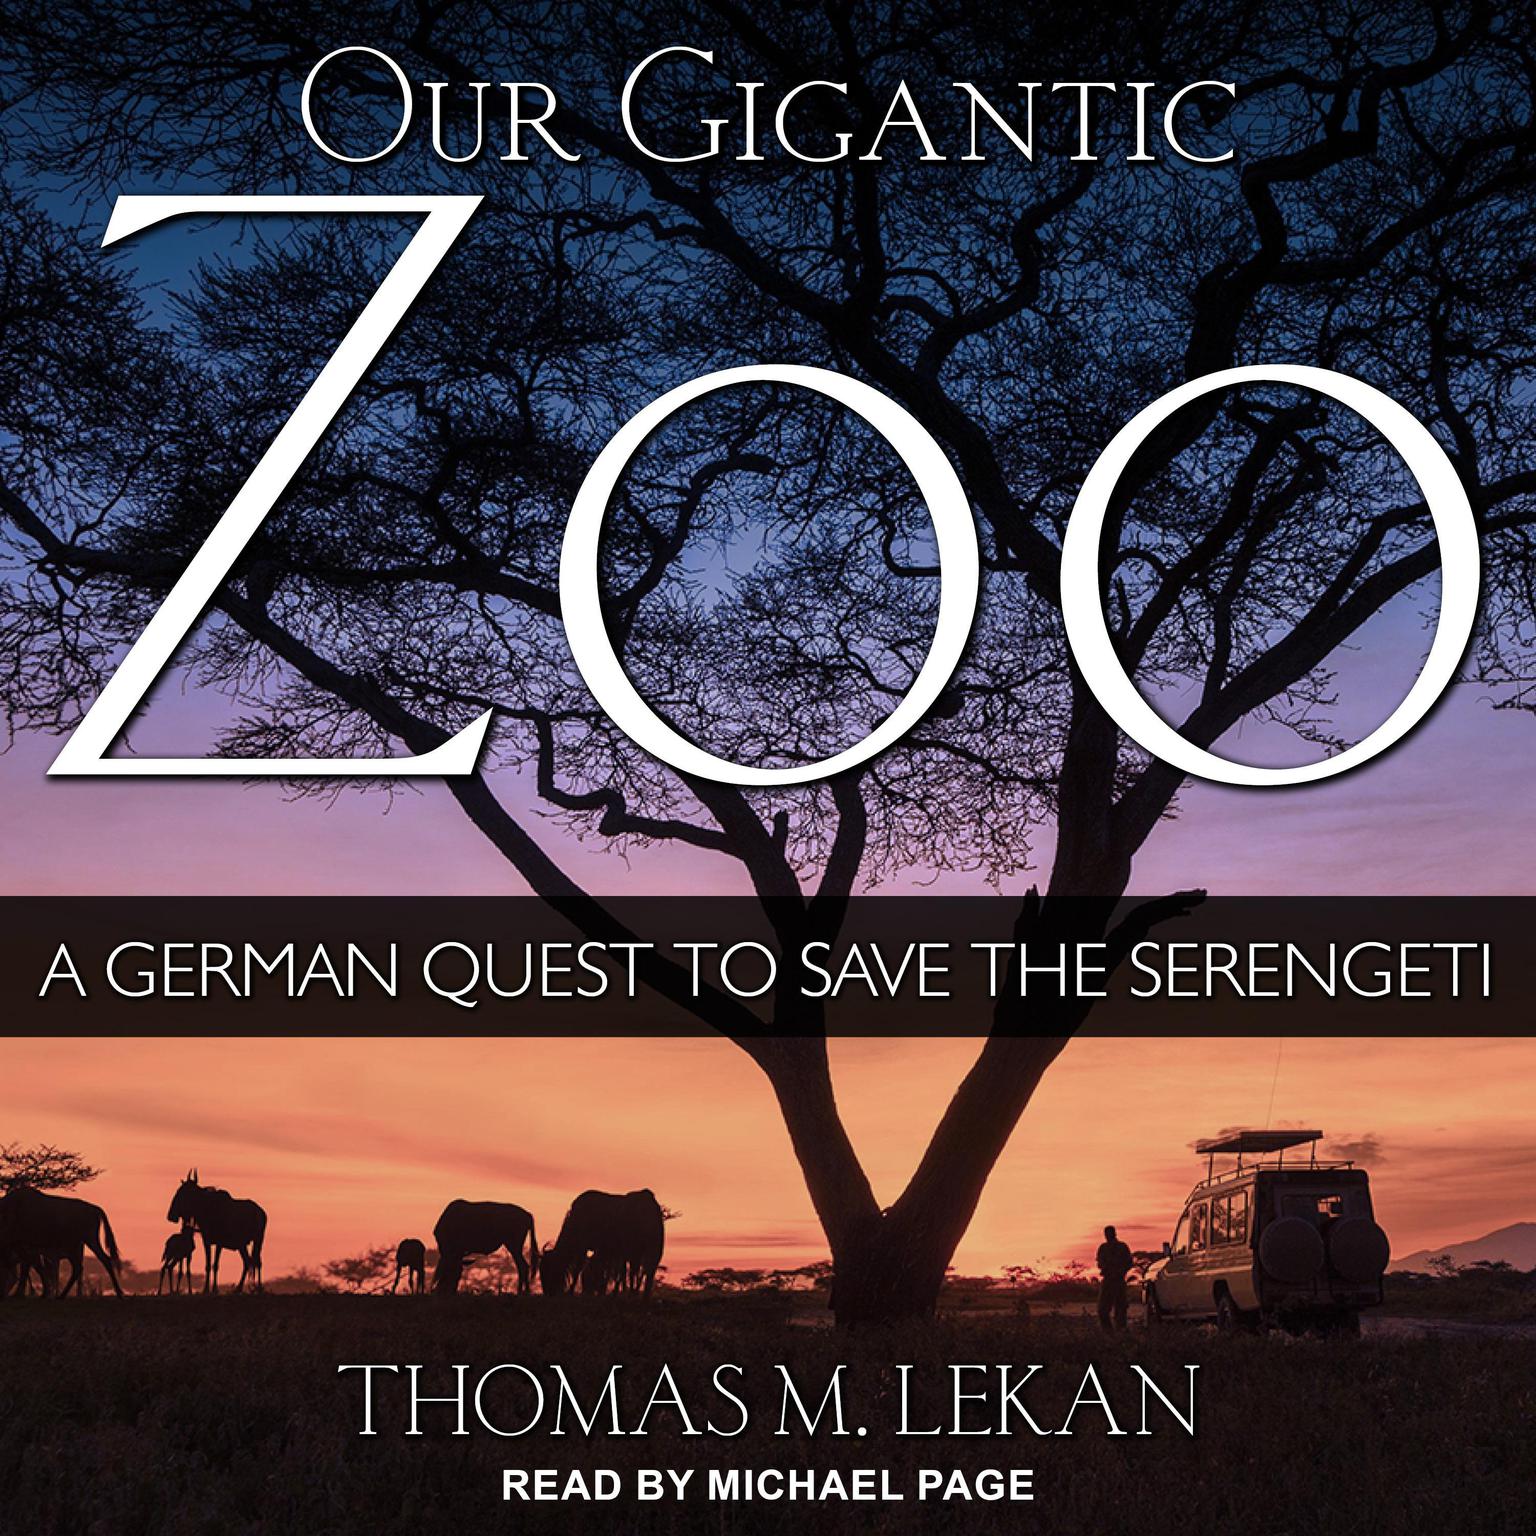 Our Gigantic Zoo: A German Quest to Save the Serengeti Audiobook, by Thomas M. Lekan